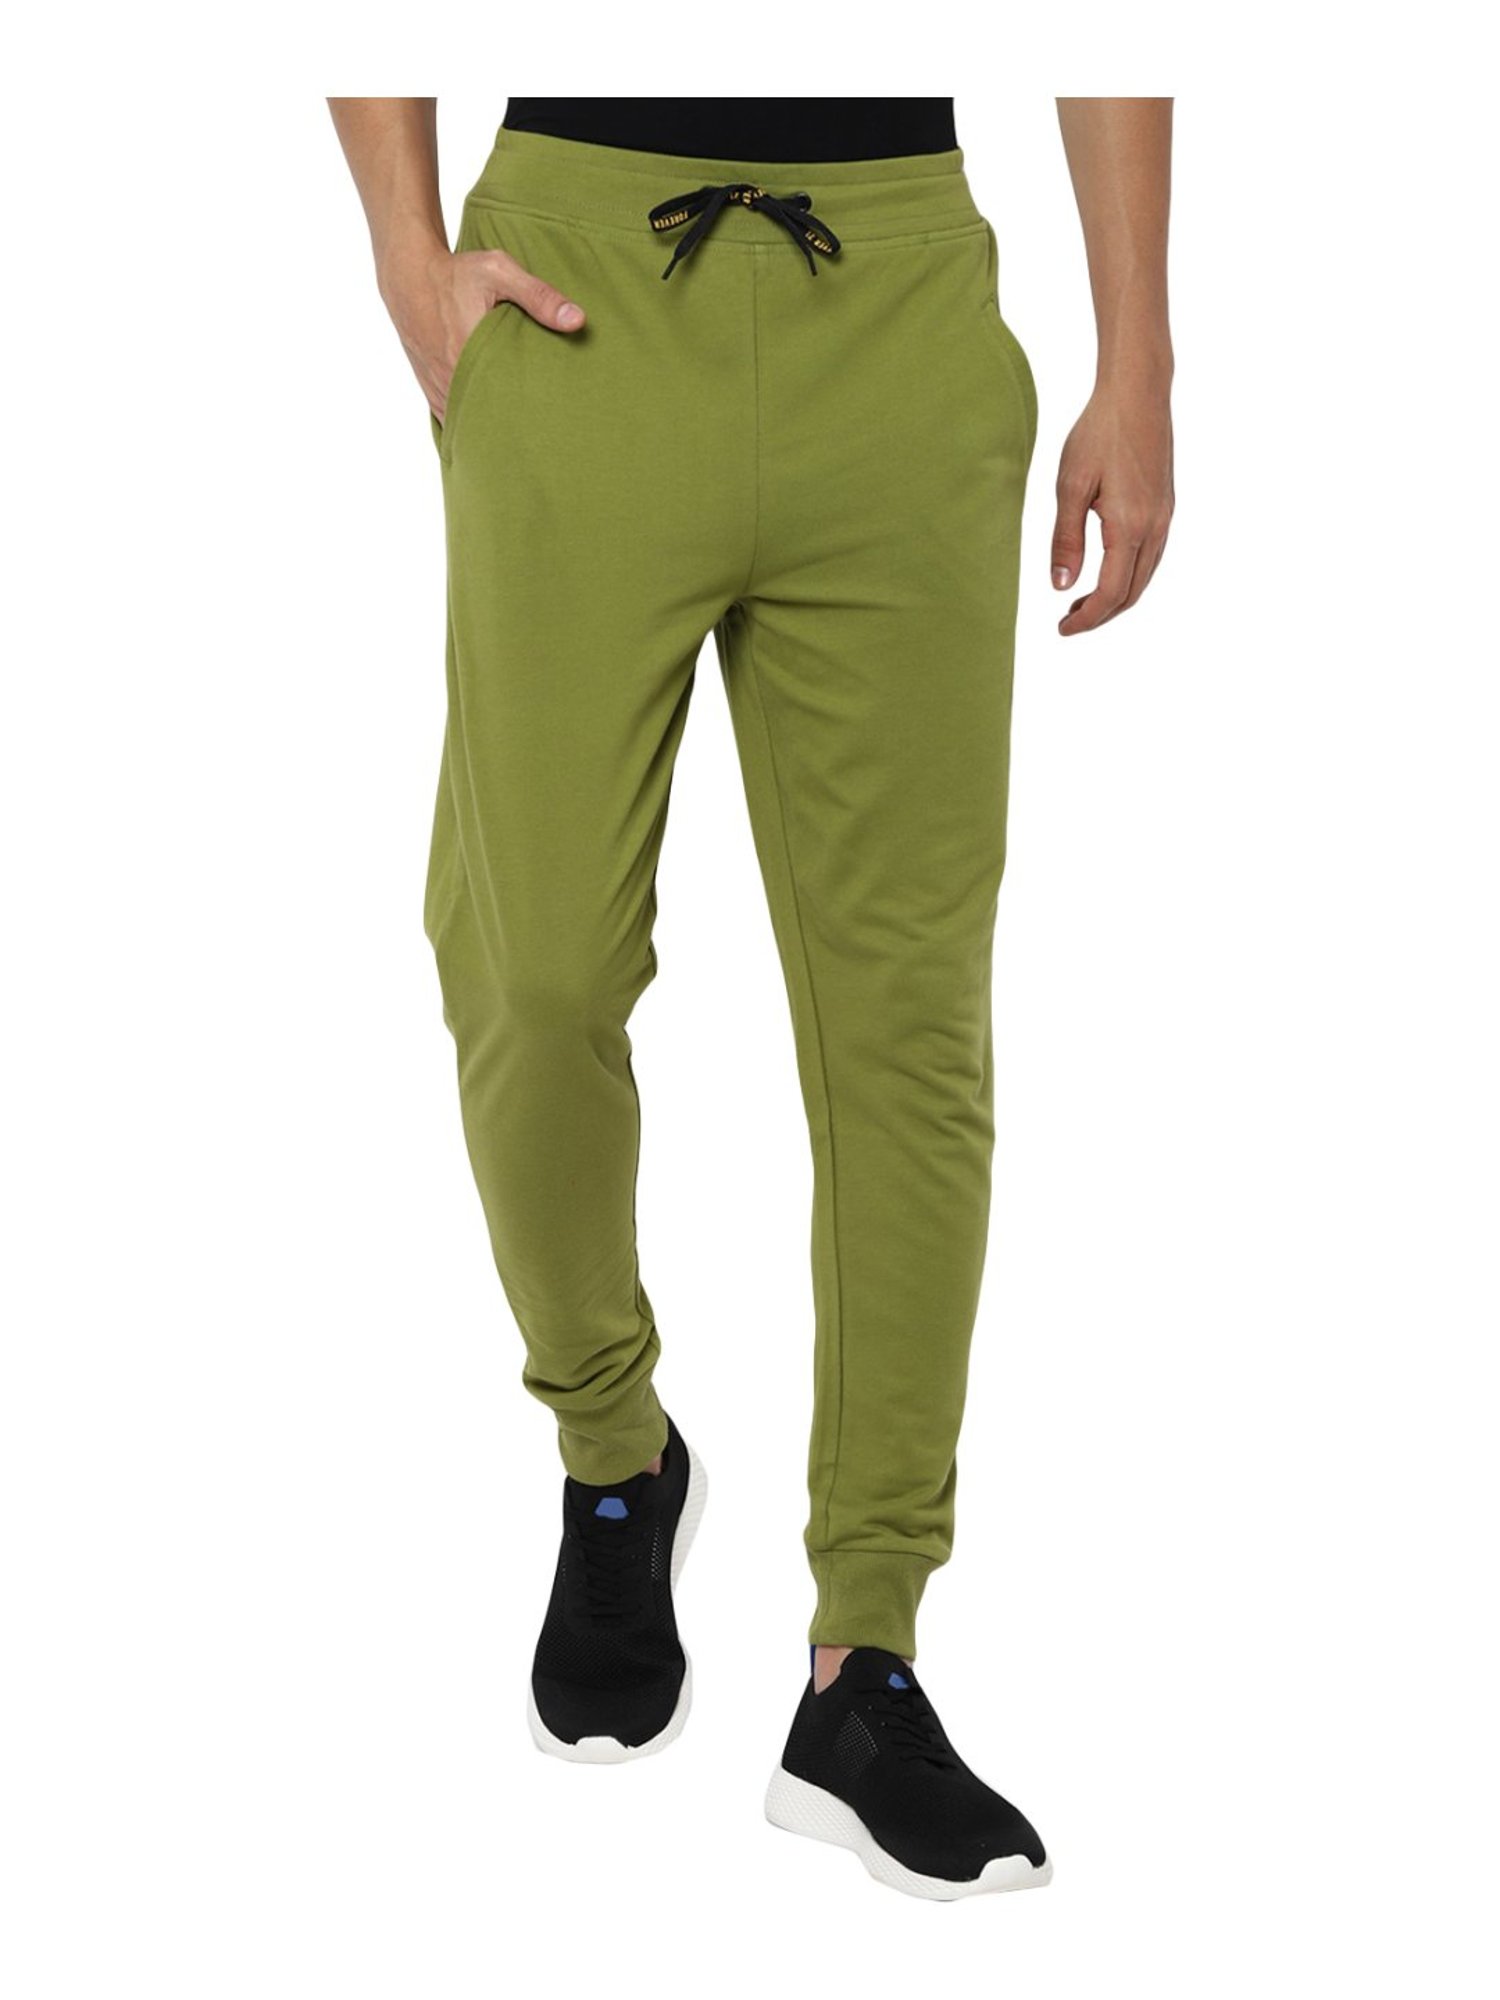 Men's Cargo Pants Relaxed Fit Sport Pants Jogger Sweatpants Drawstring  Outdoor Trousers with Pockets Army Green M at Amazon Men's Clothing store